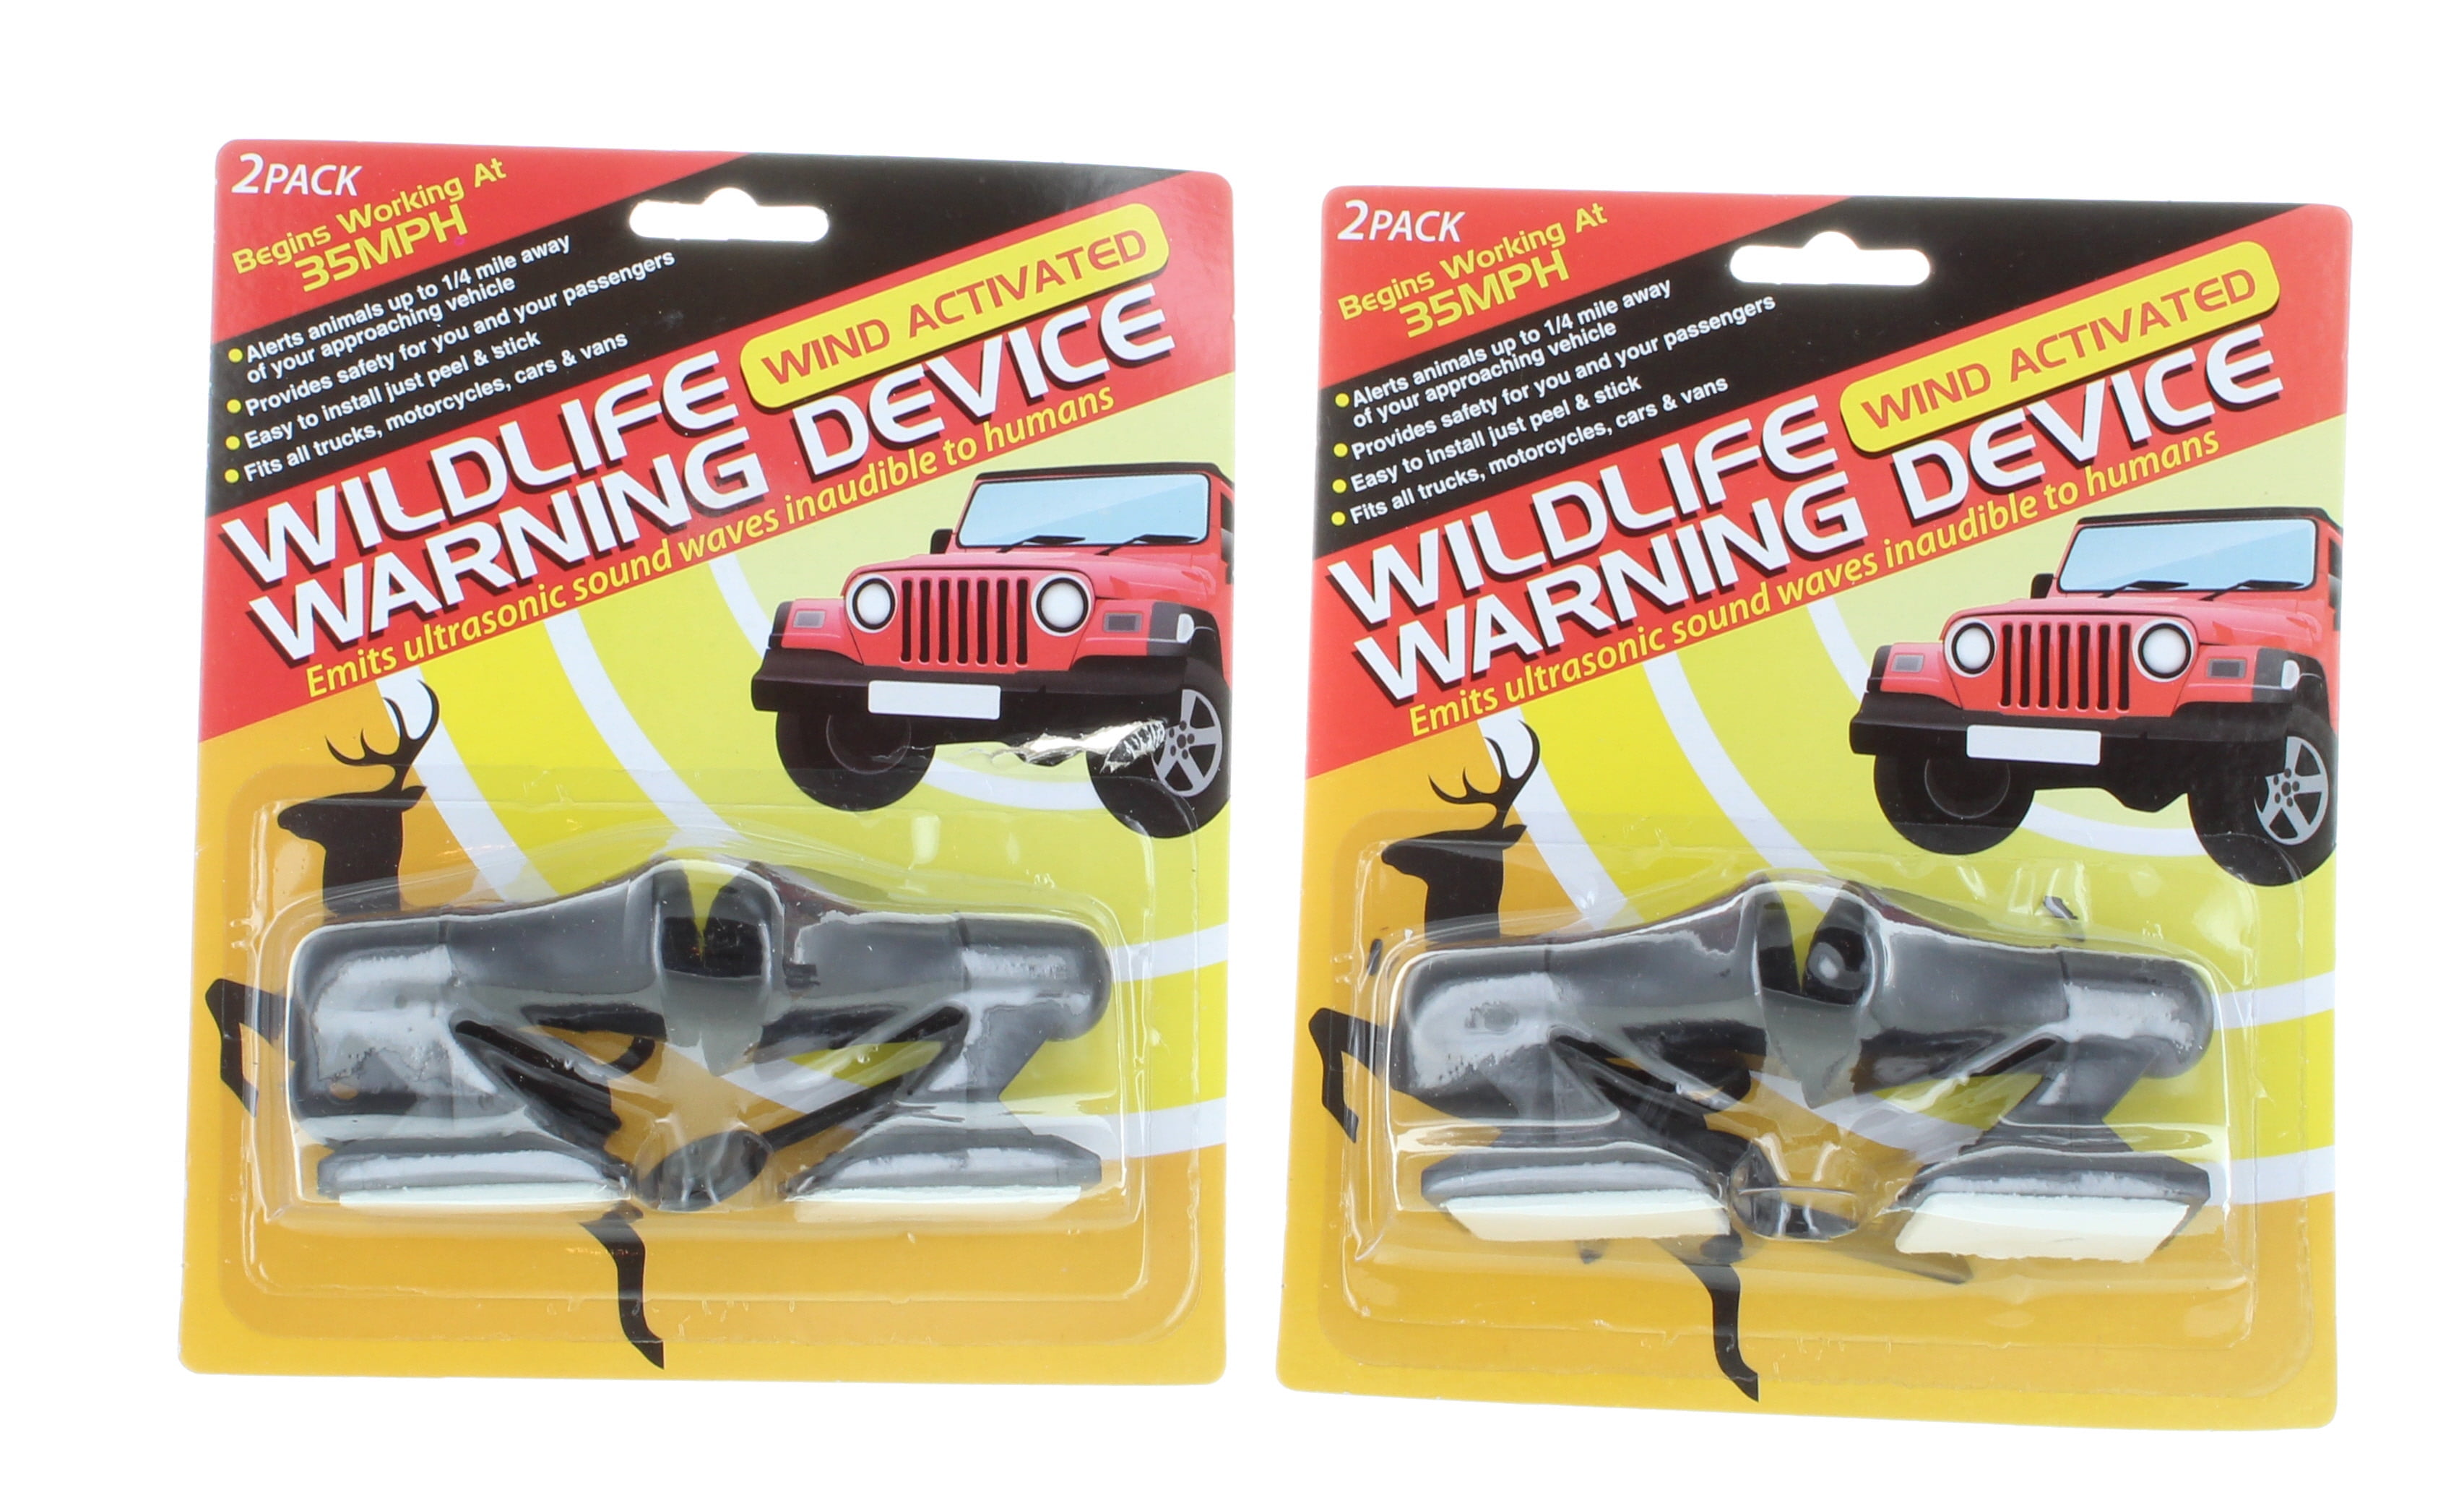 4 PIECE ULTRASONIC CAR DEER WARNING WHISTLE Auto Safety Save Animal Alert Device